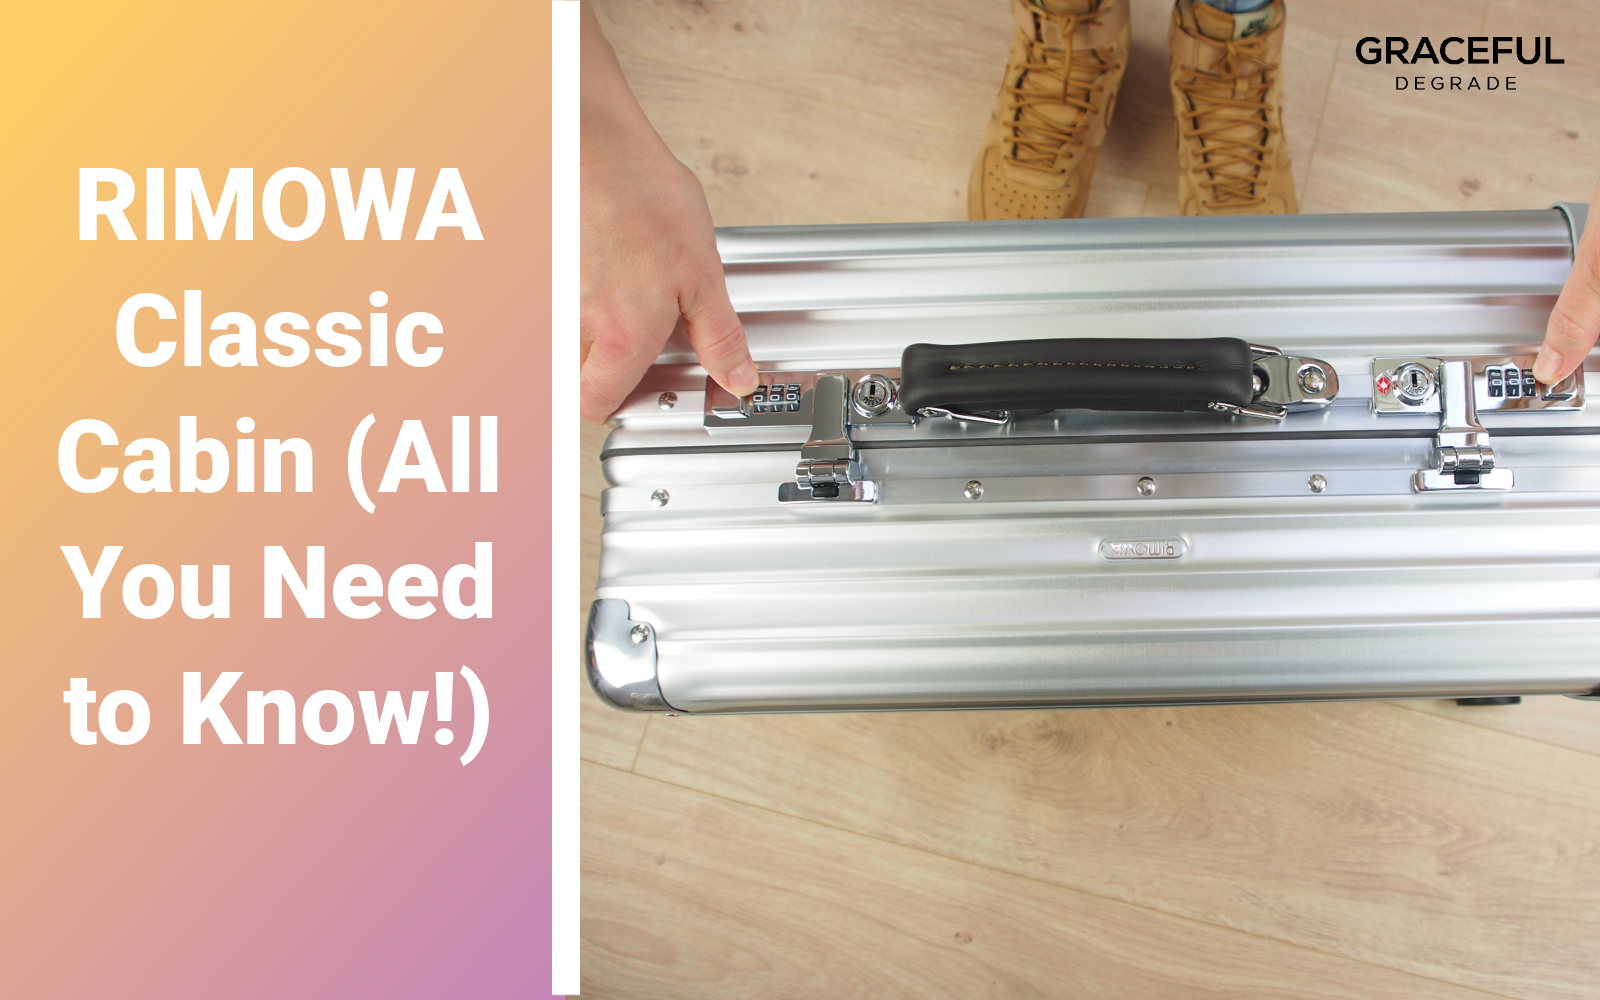 RIMOWA Classic Cabin (All You Need to Know!)